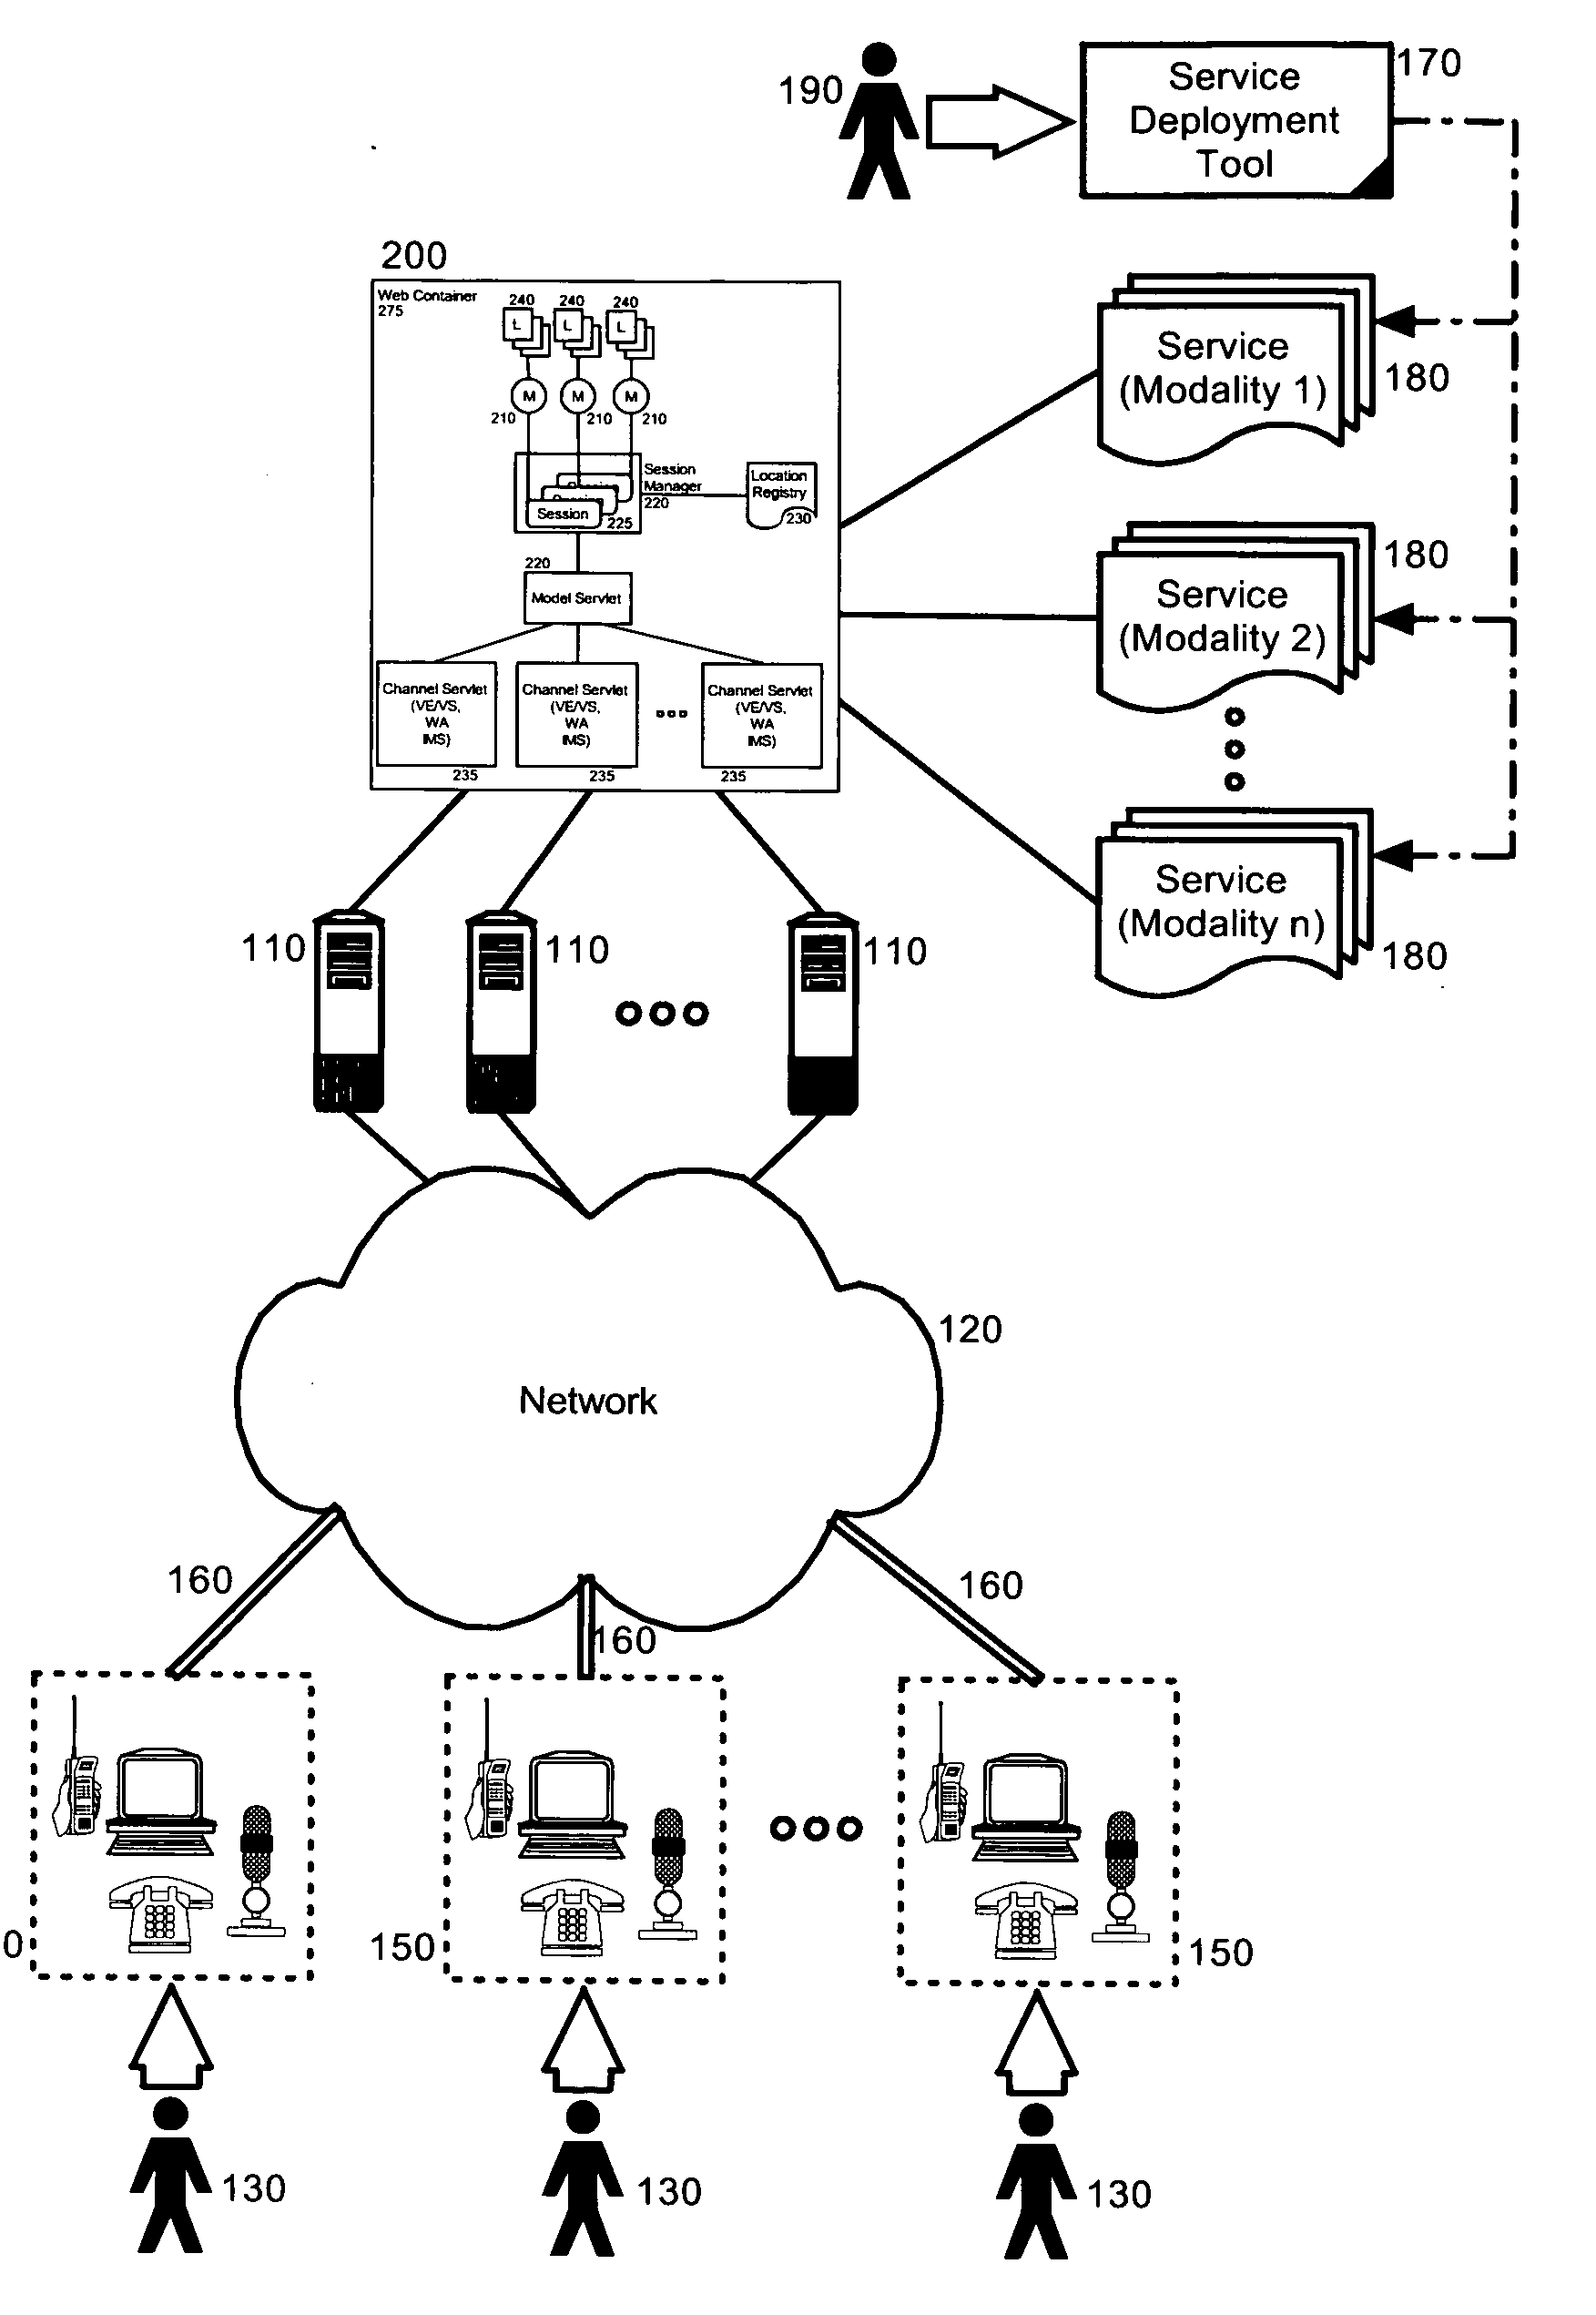 Managing concurrent data updates in a composite services delivery system